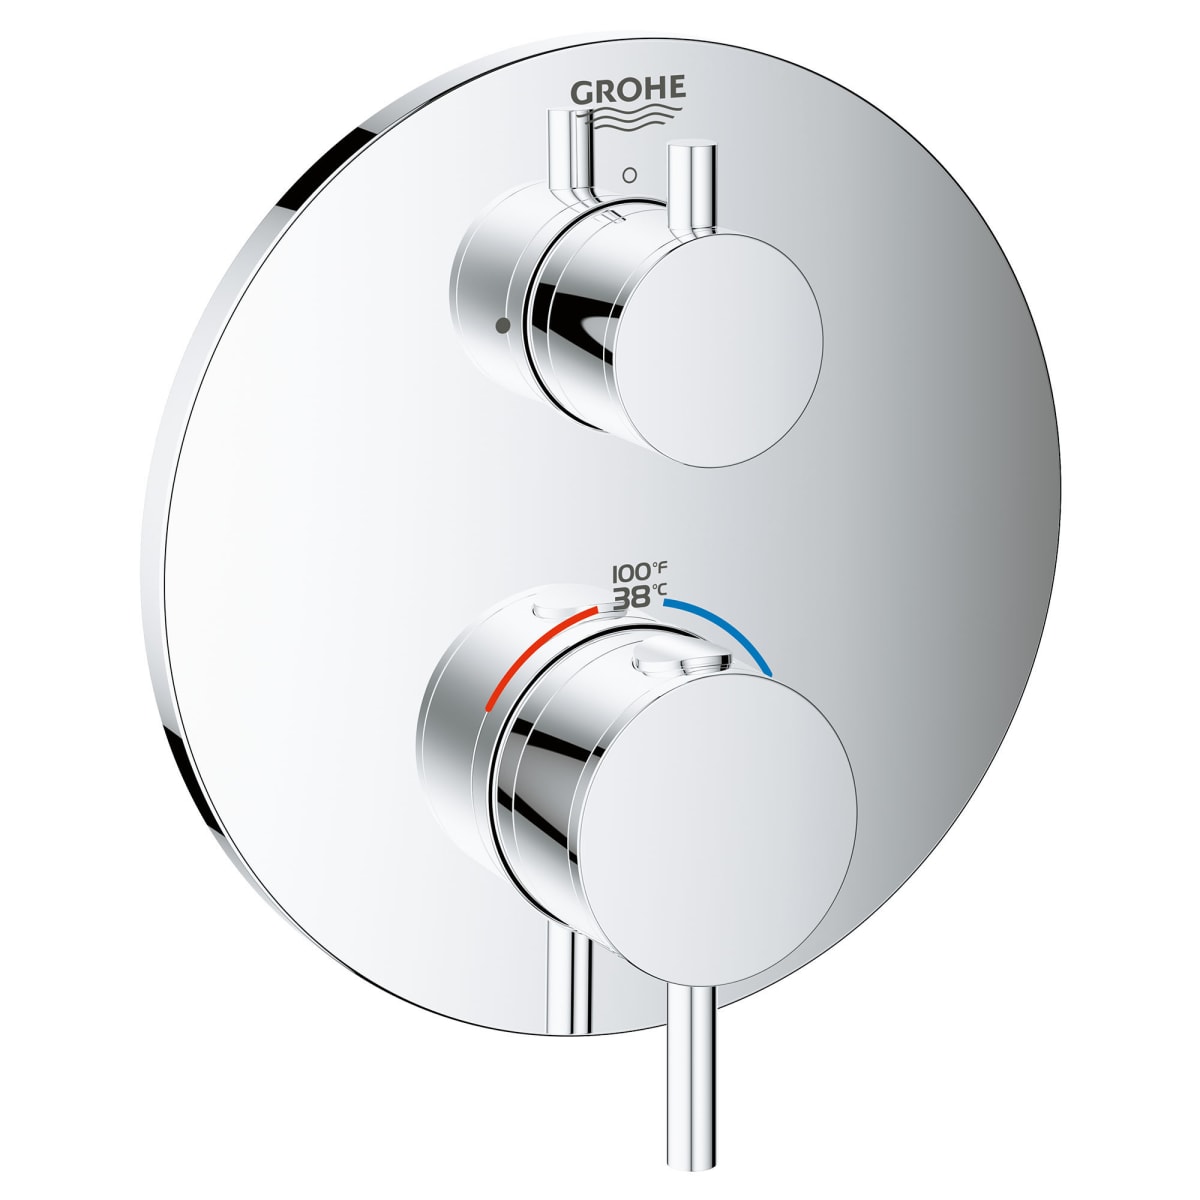 Grohe 24151003 Starlight Chrome Atrio Dual Function Thermostatic Valve Trim  Only with Double Knob Handle, Integrated Diverter, and Volume Control  Less Rough In